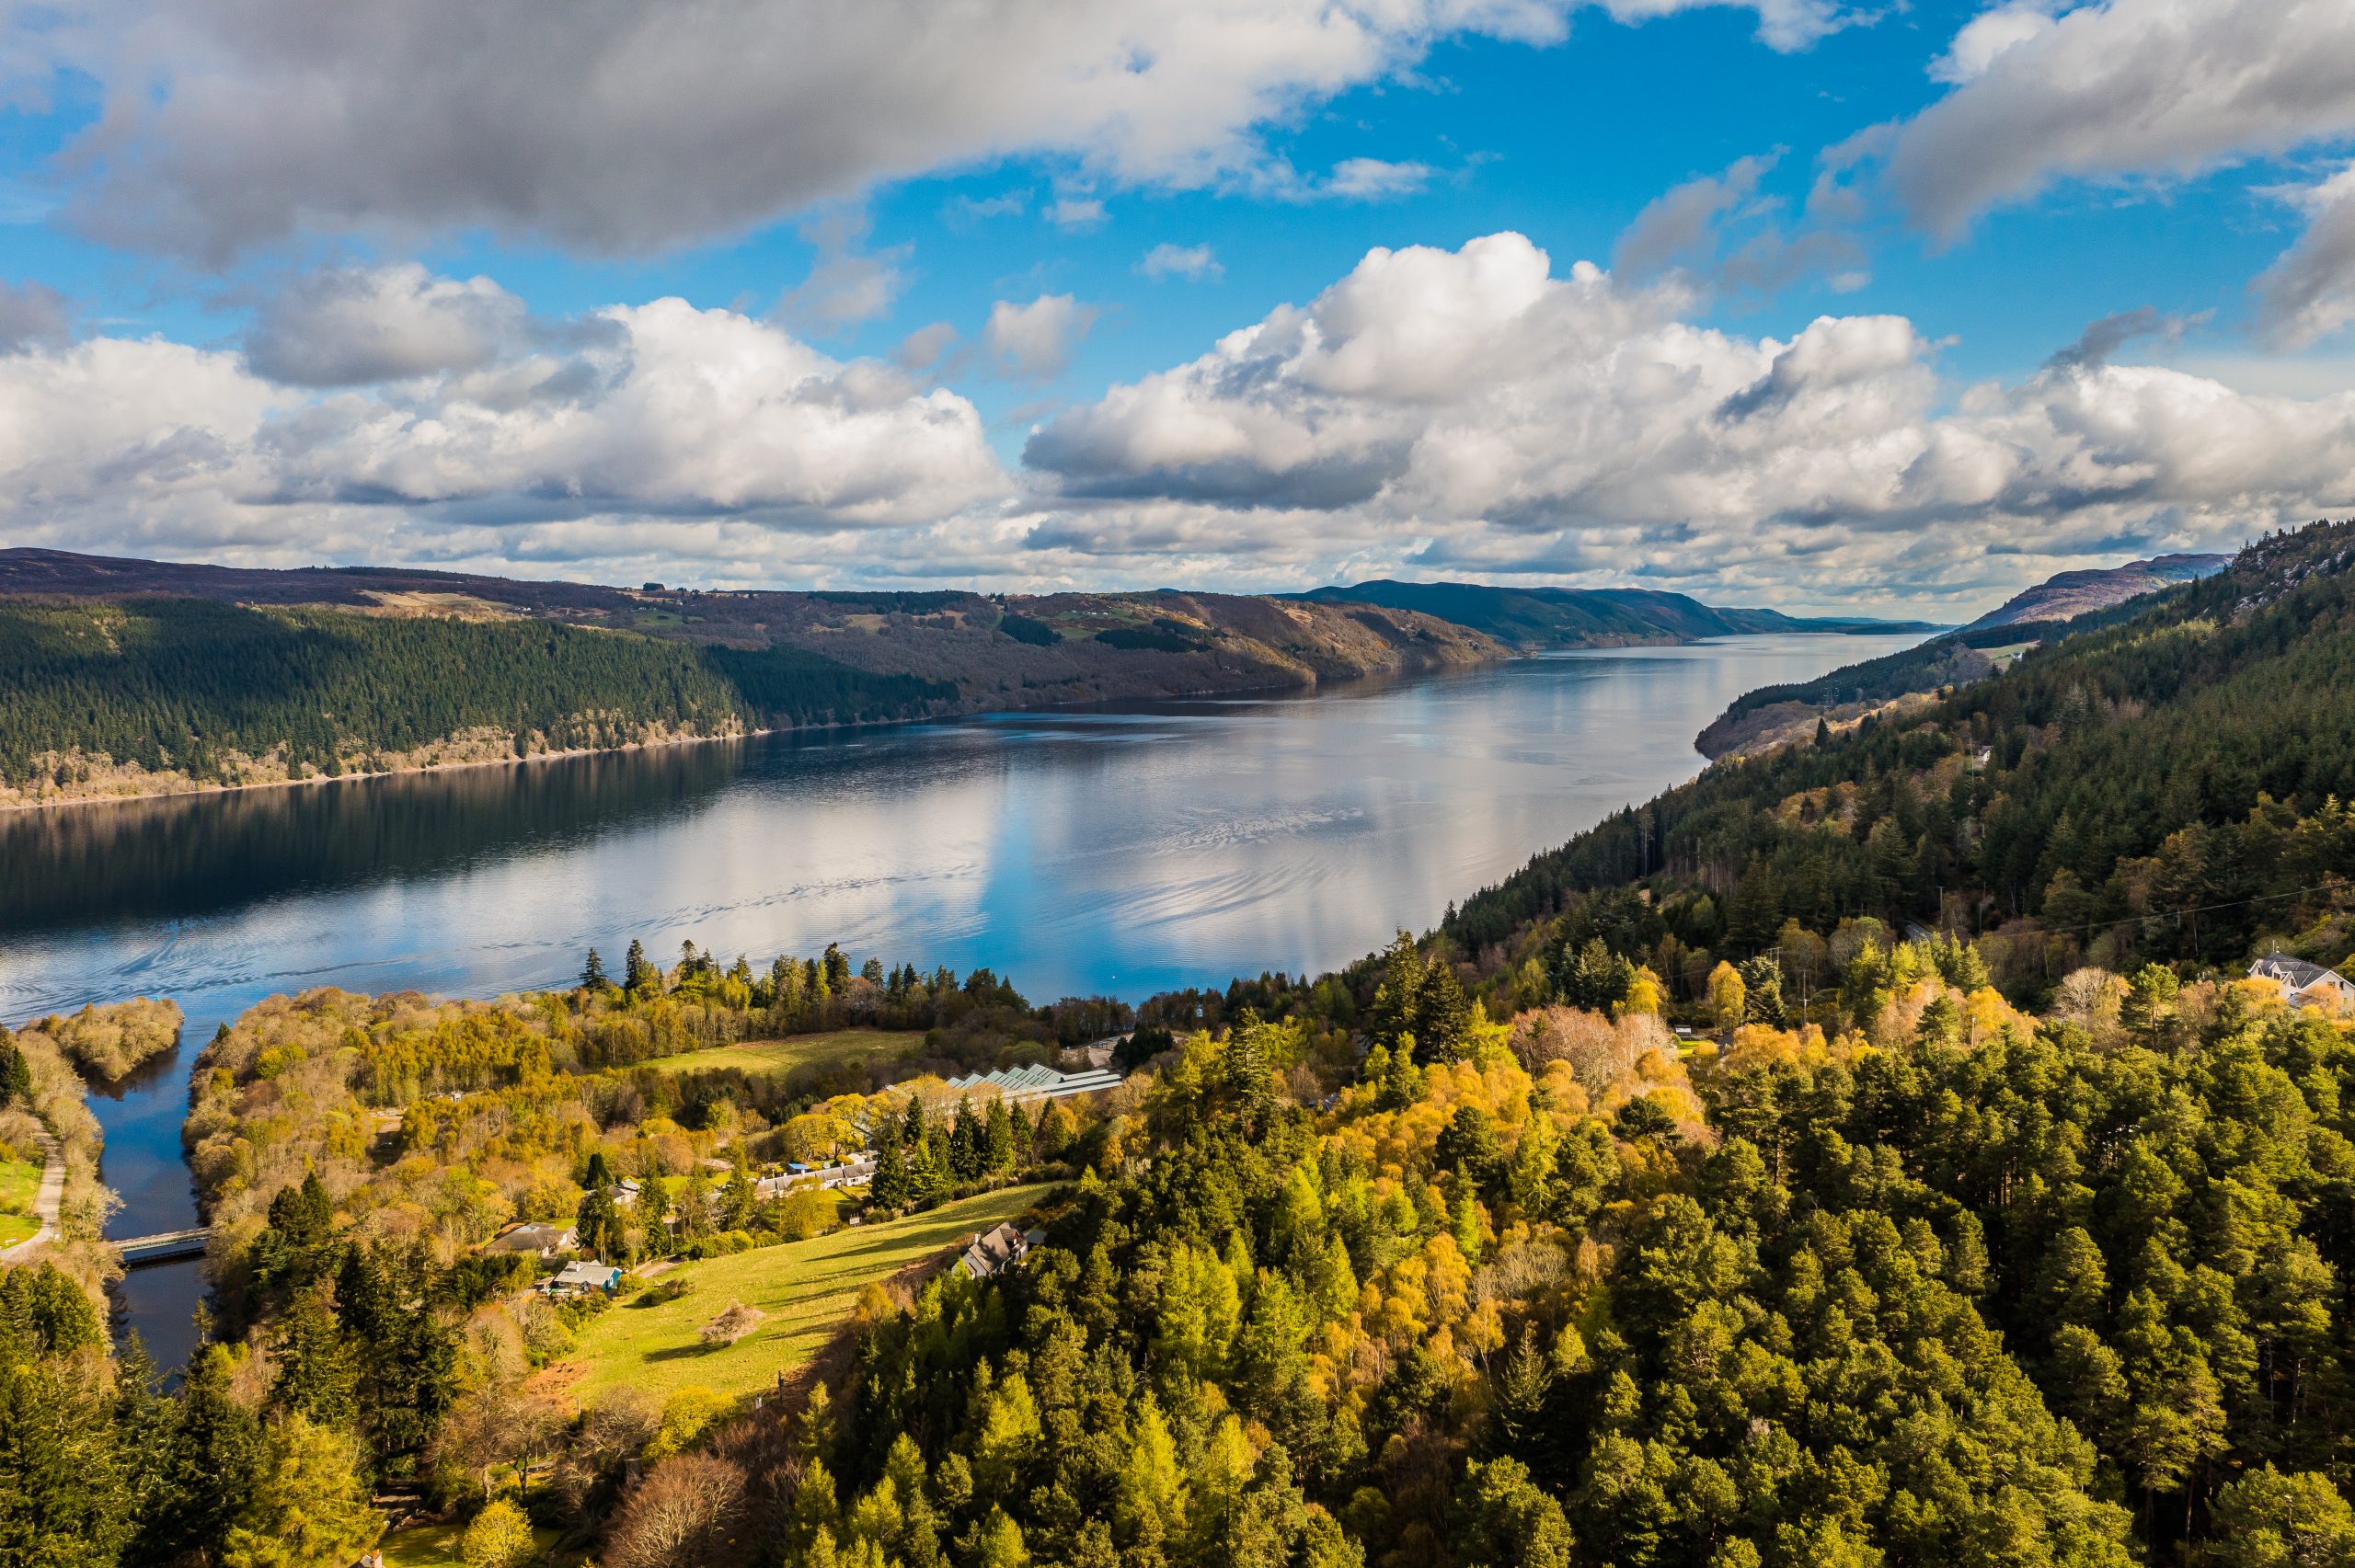 Visit Inverness Loch Ness reports strong year - Business News